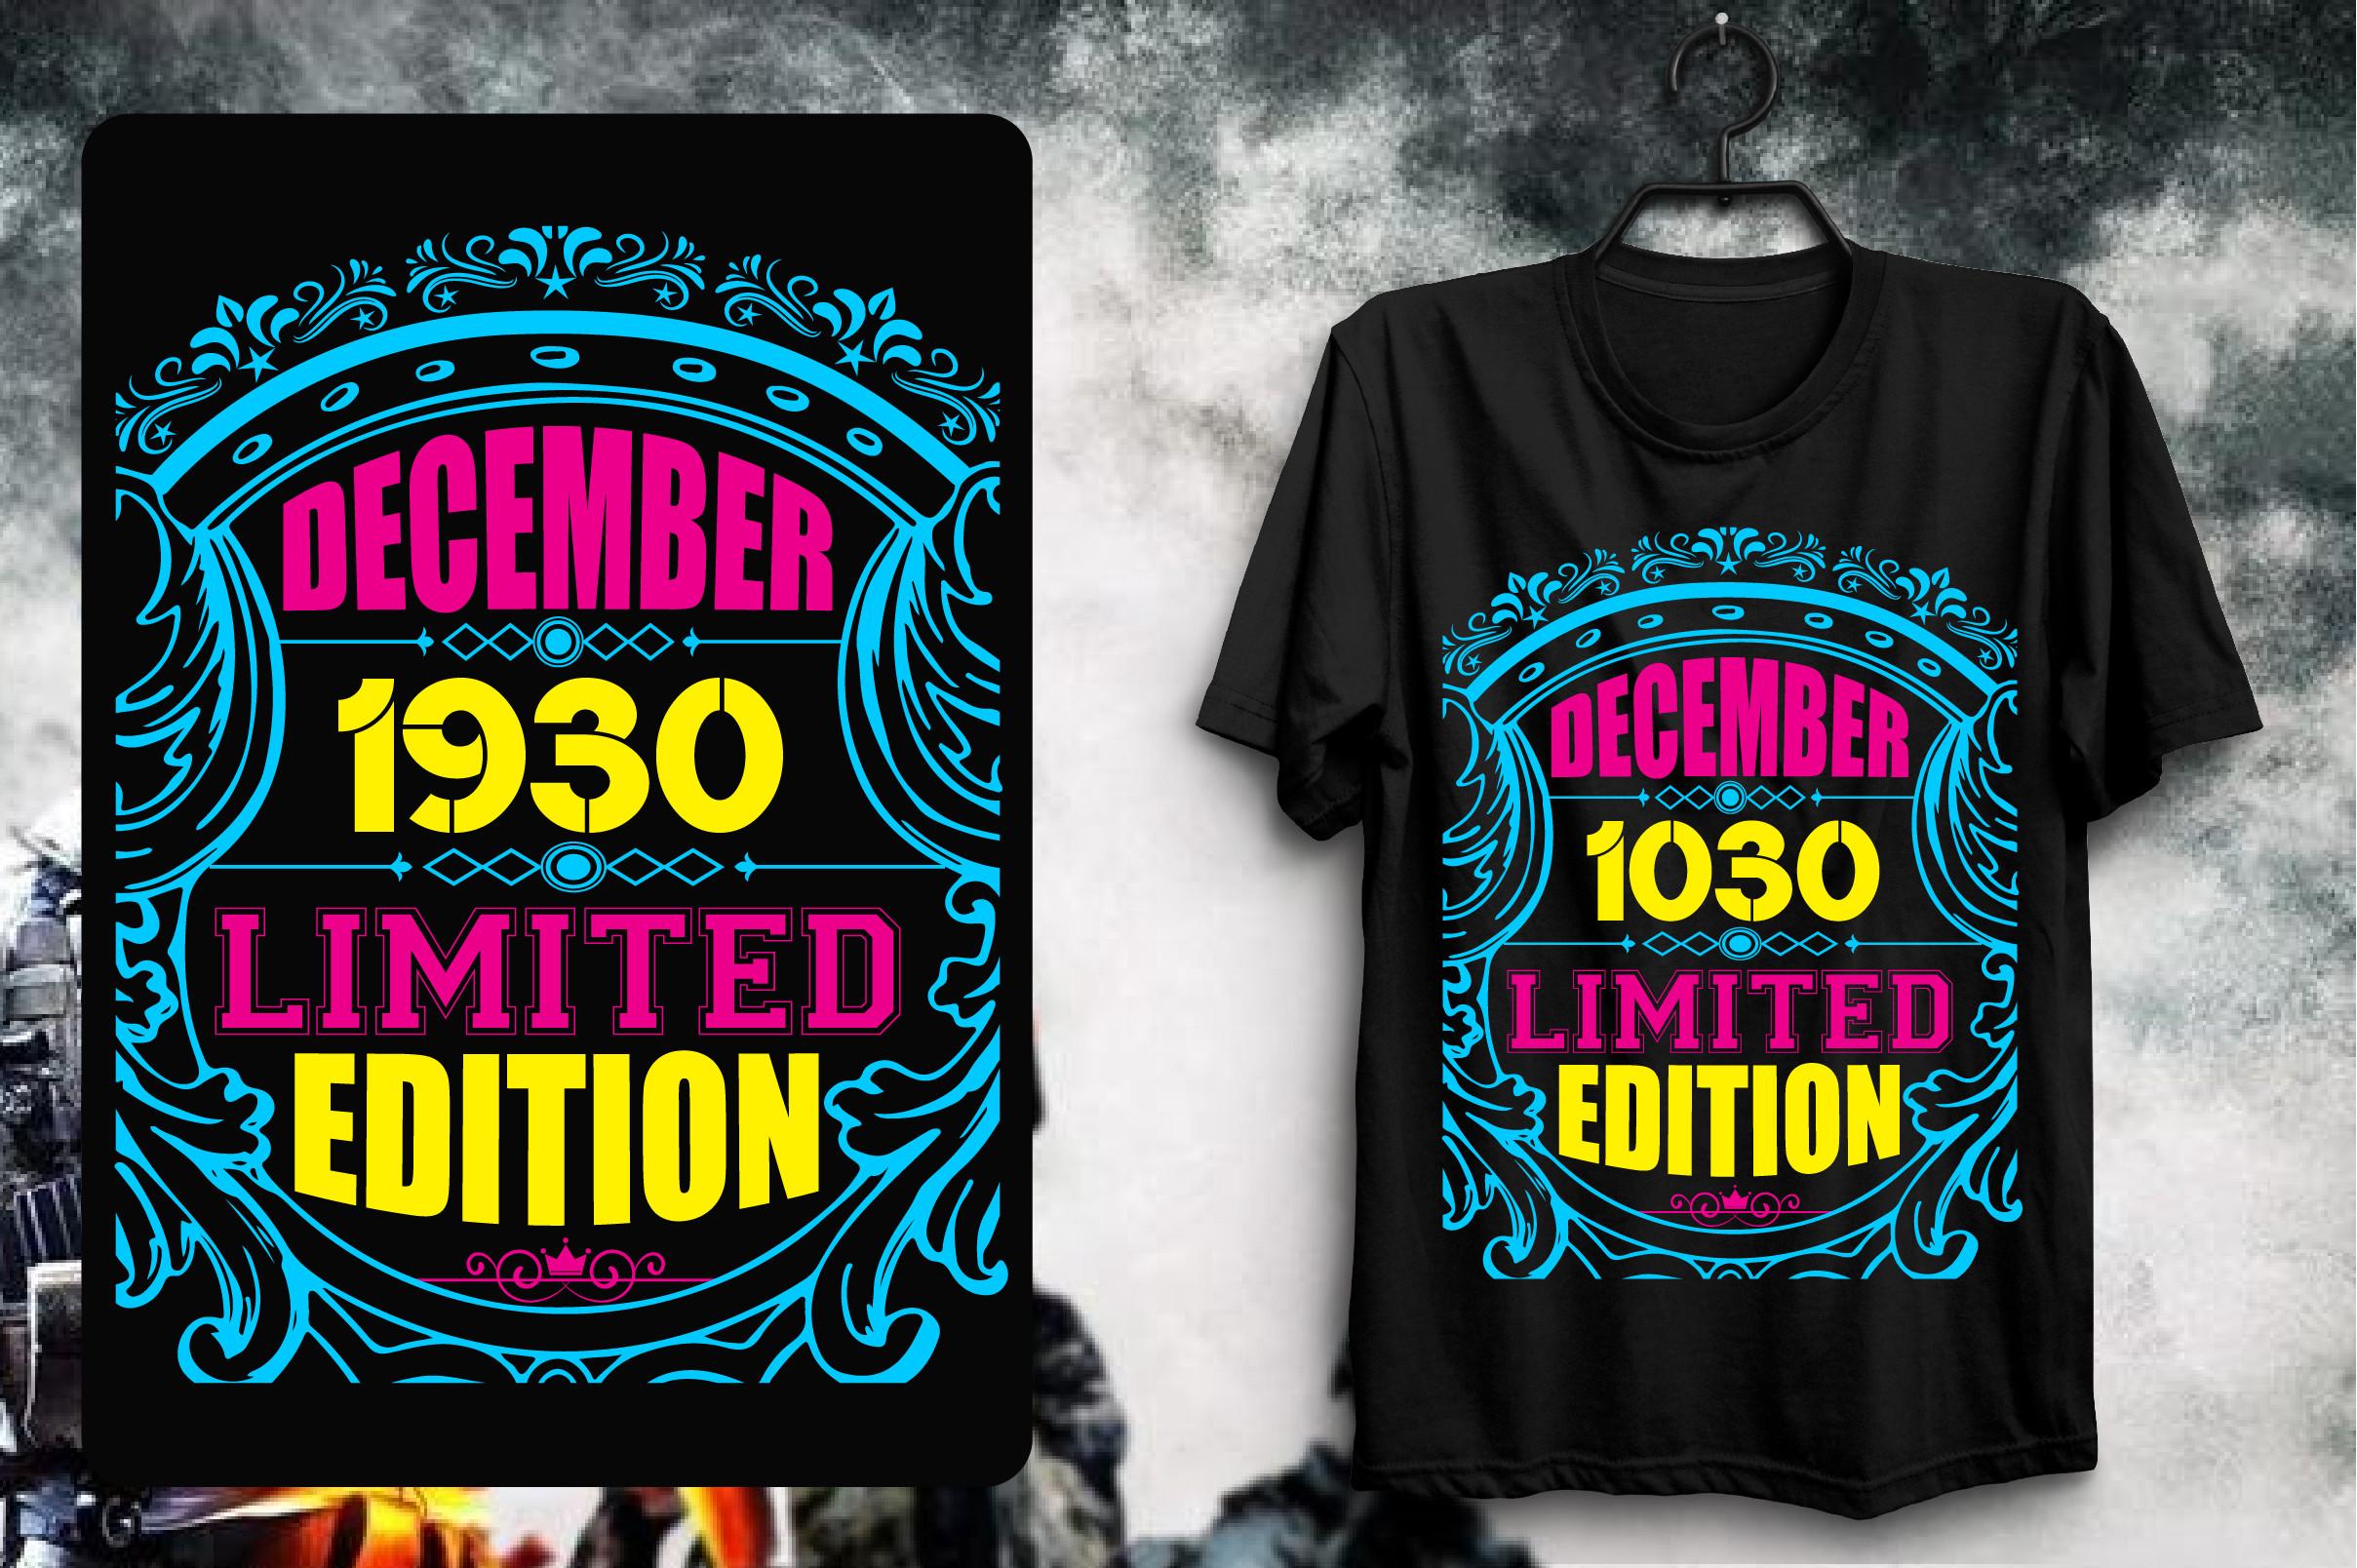 December 1930 Limited Edition